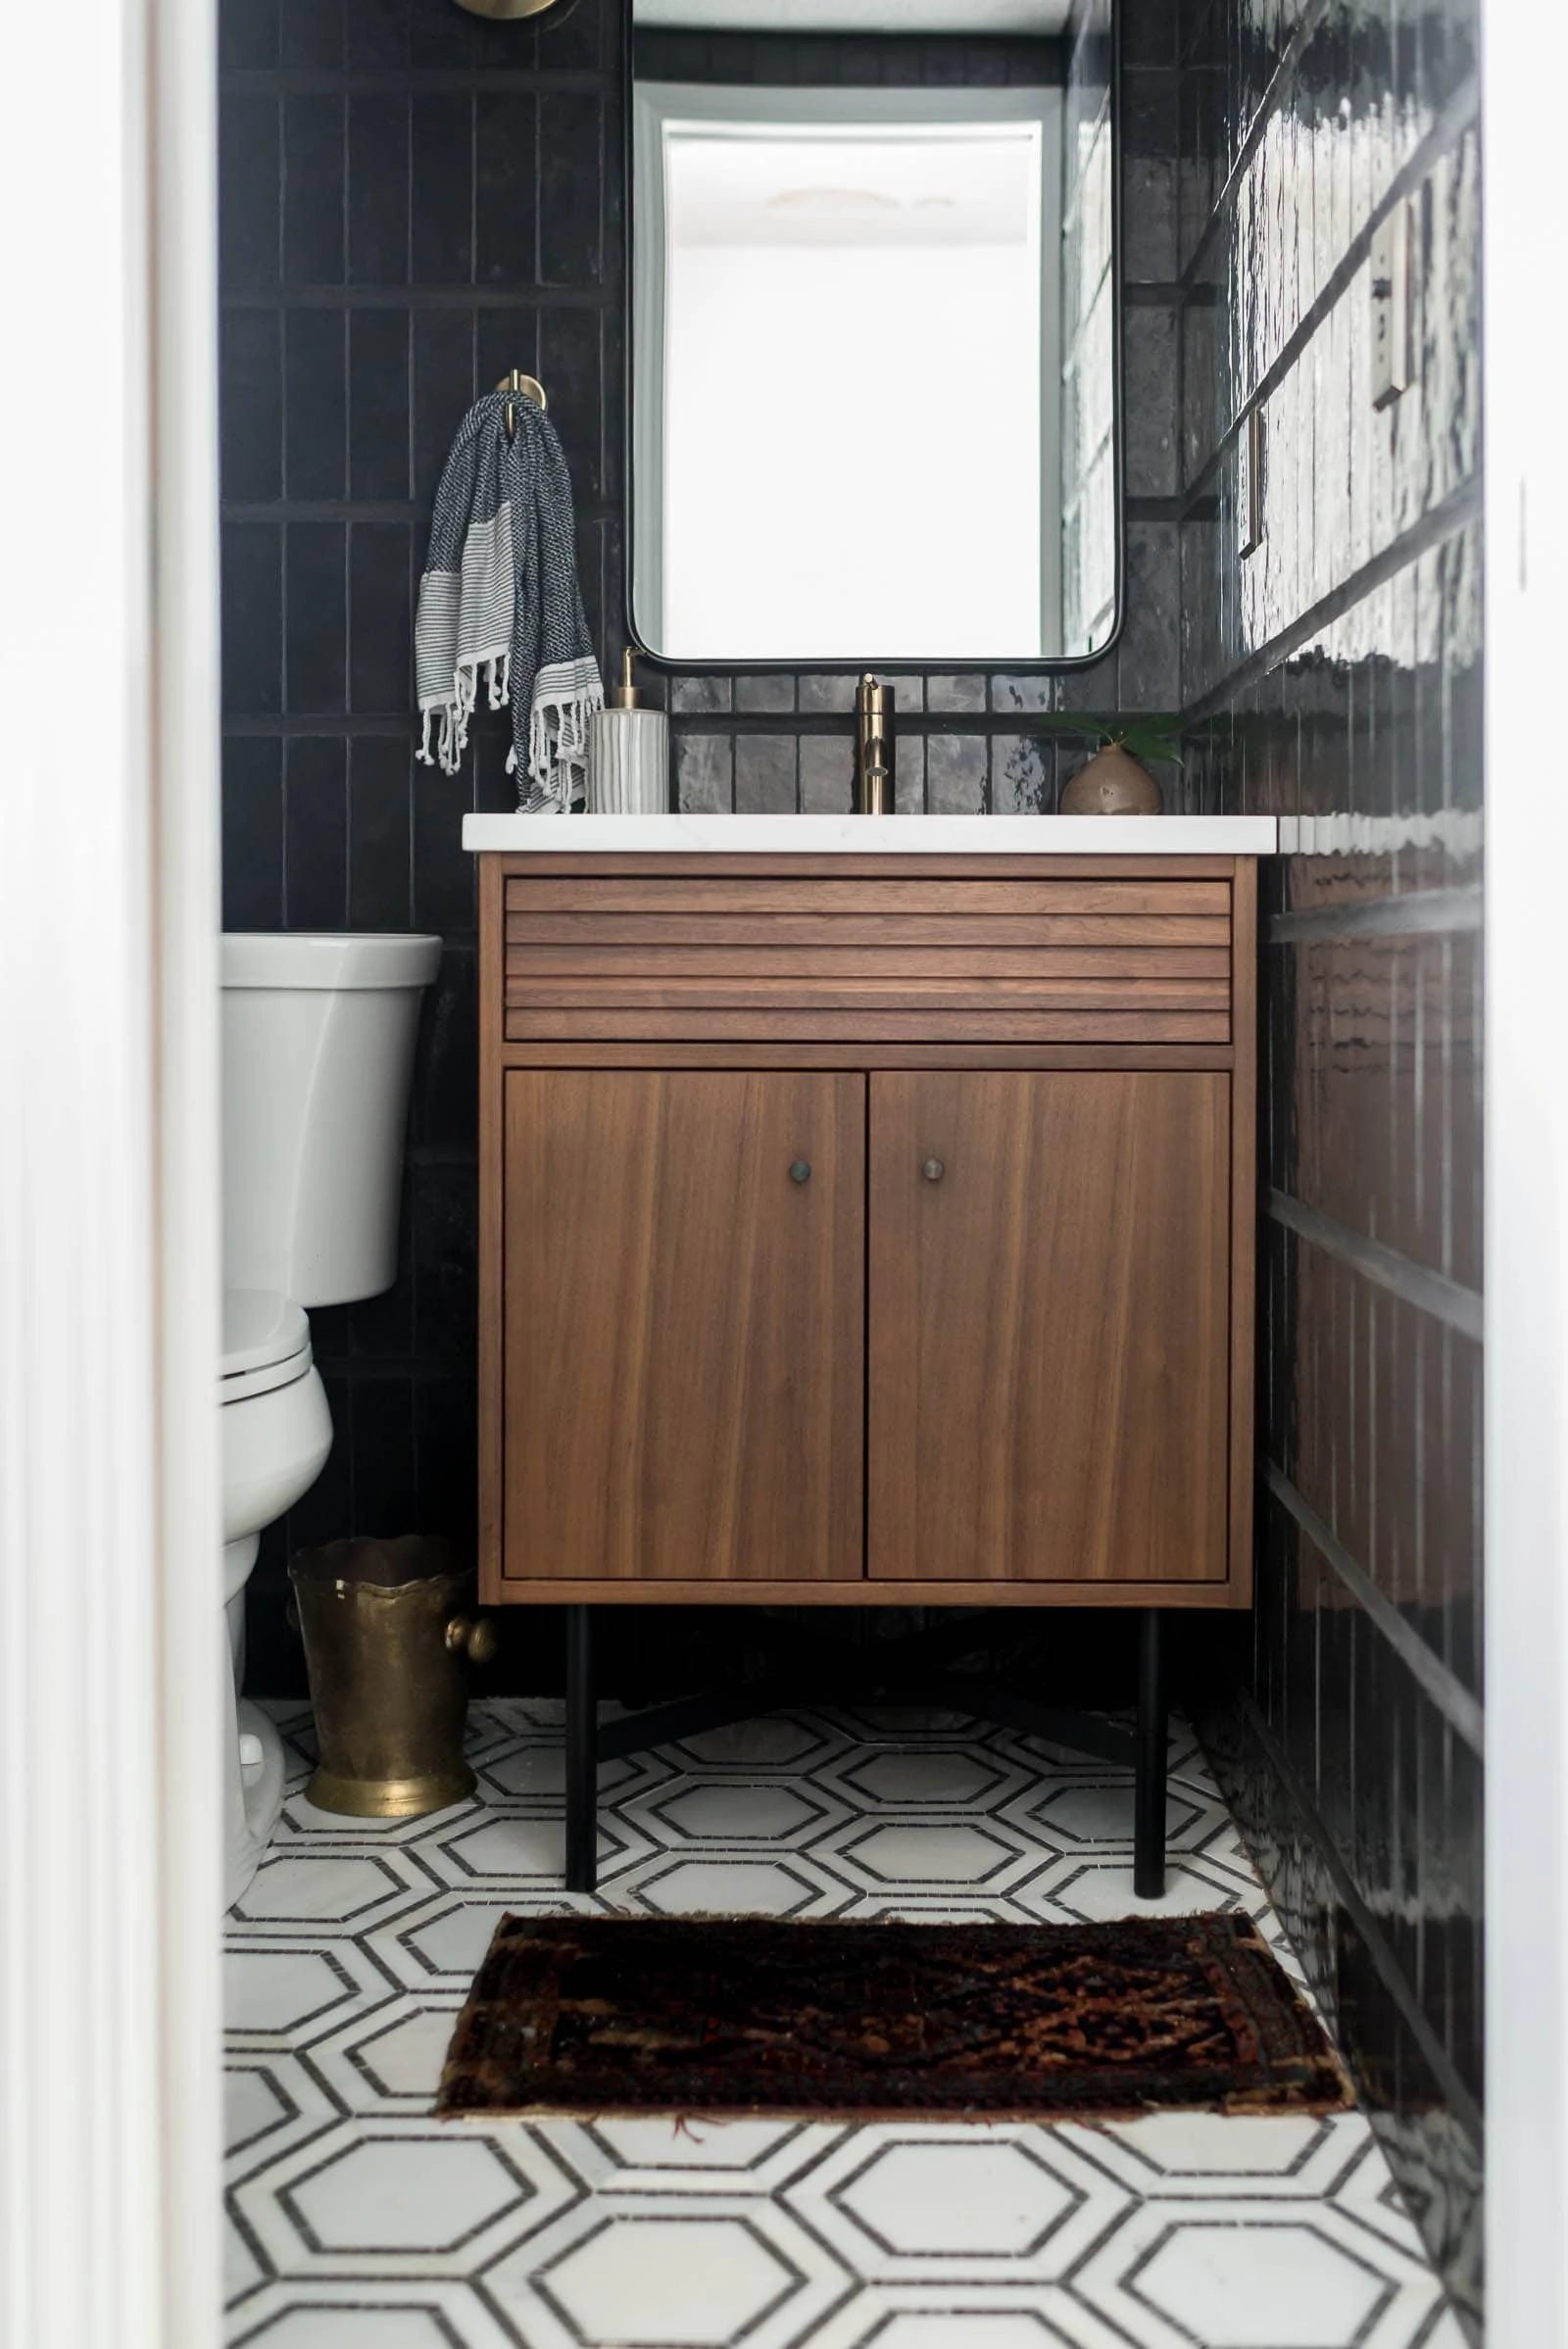 Black bathroom with black tile walls, walnut vanity and marble flooring plus powder room dimensions in this before/after